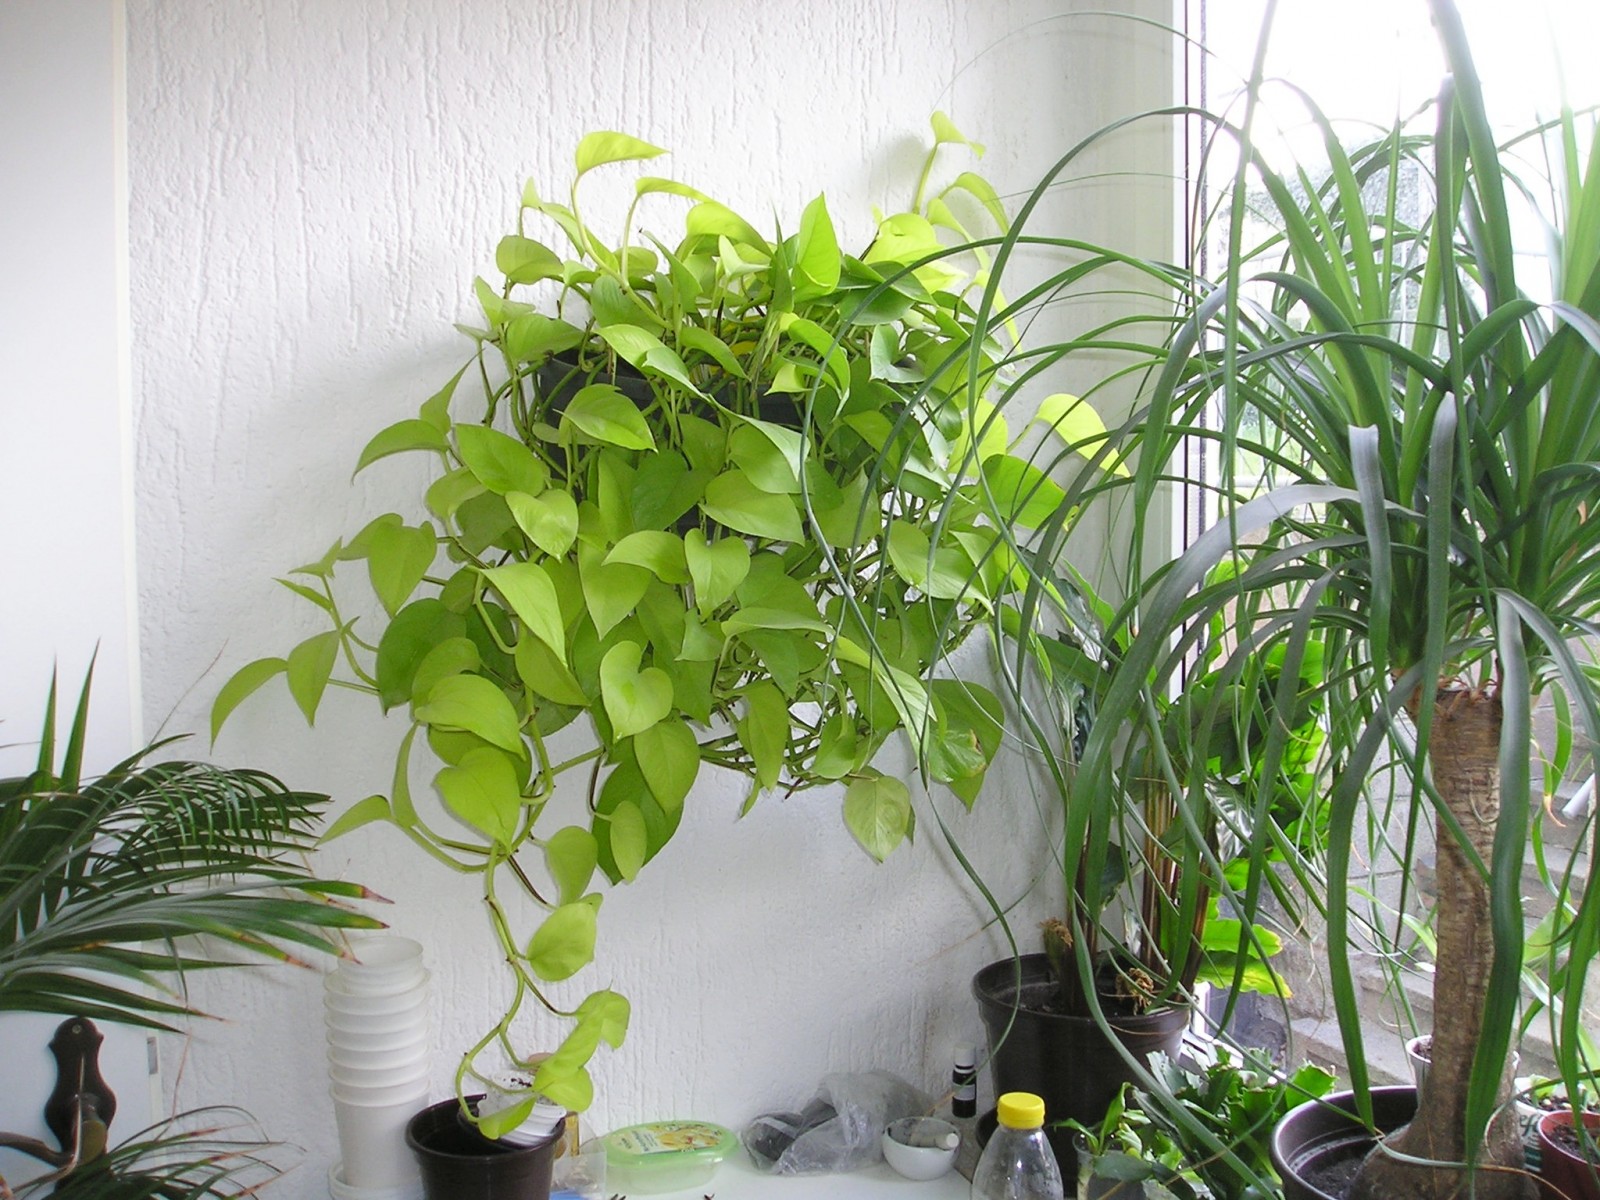 Short on Space? 5 Tips for Gardening Indoors with Limited Space